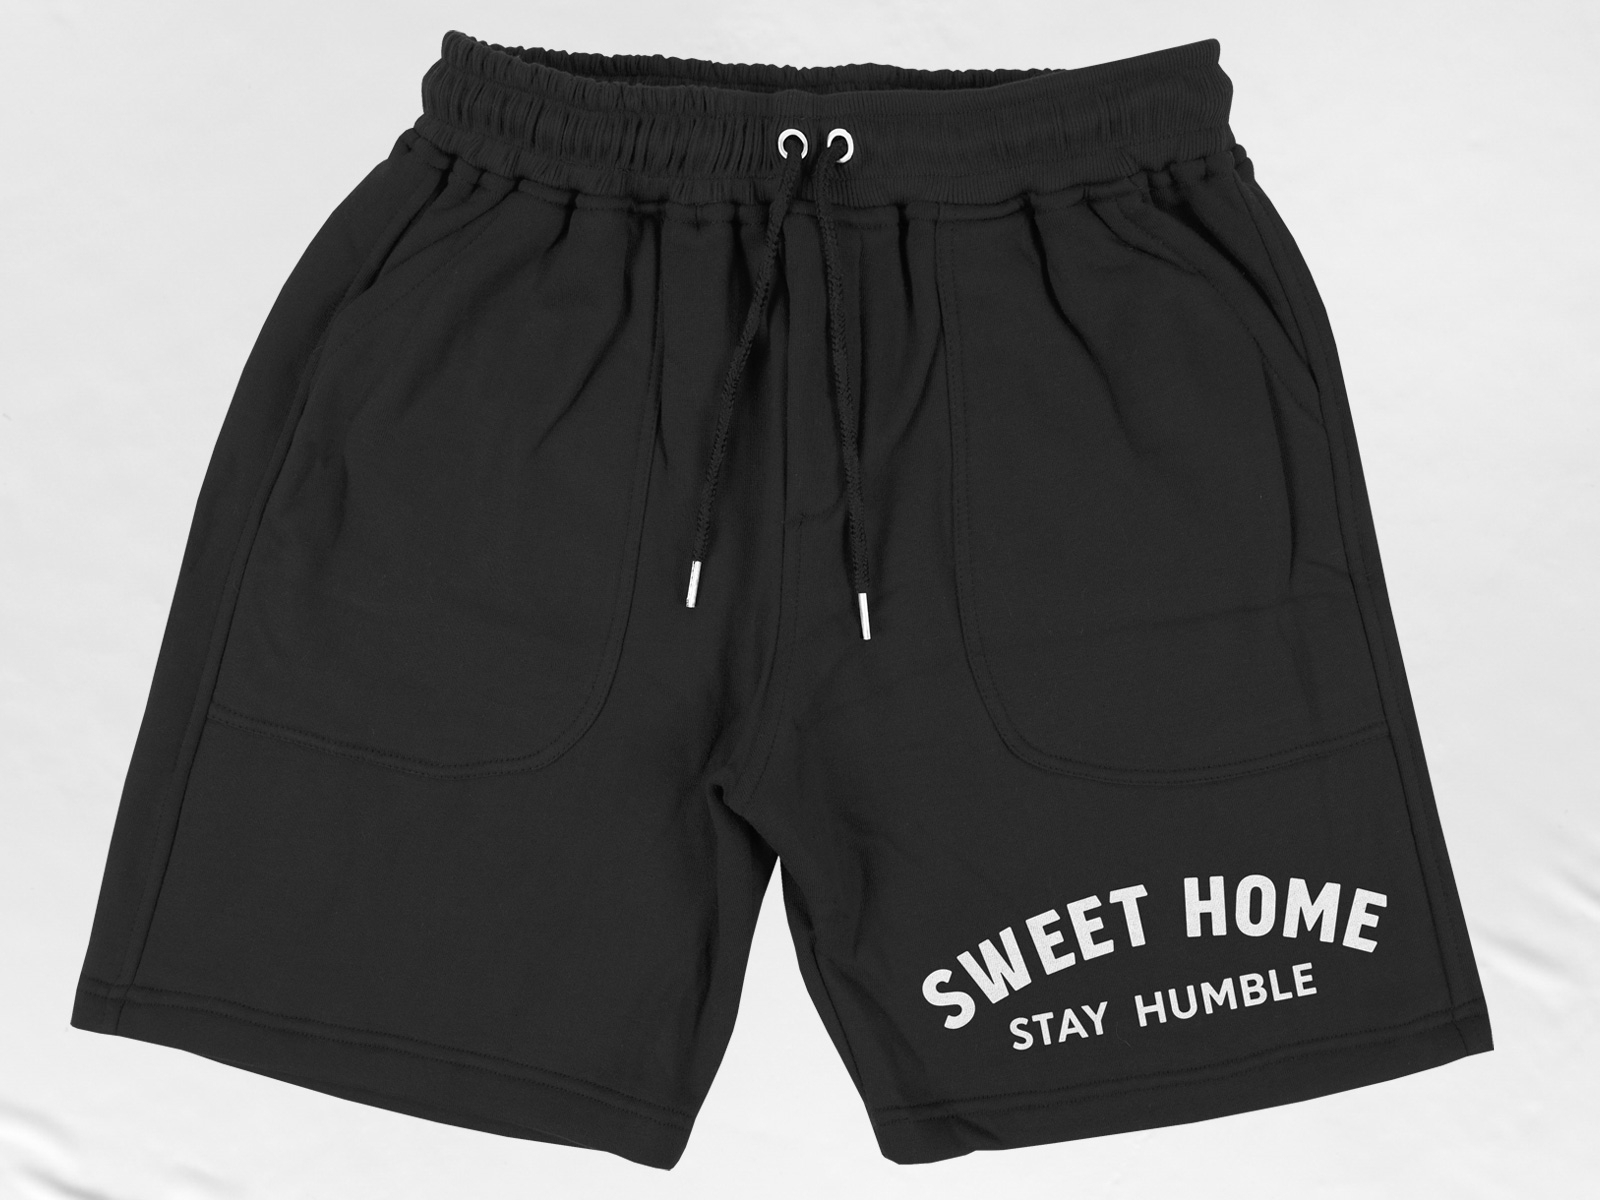 SHORTS MOCKUP (Front) by Daldsgh on Dribbble